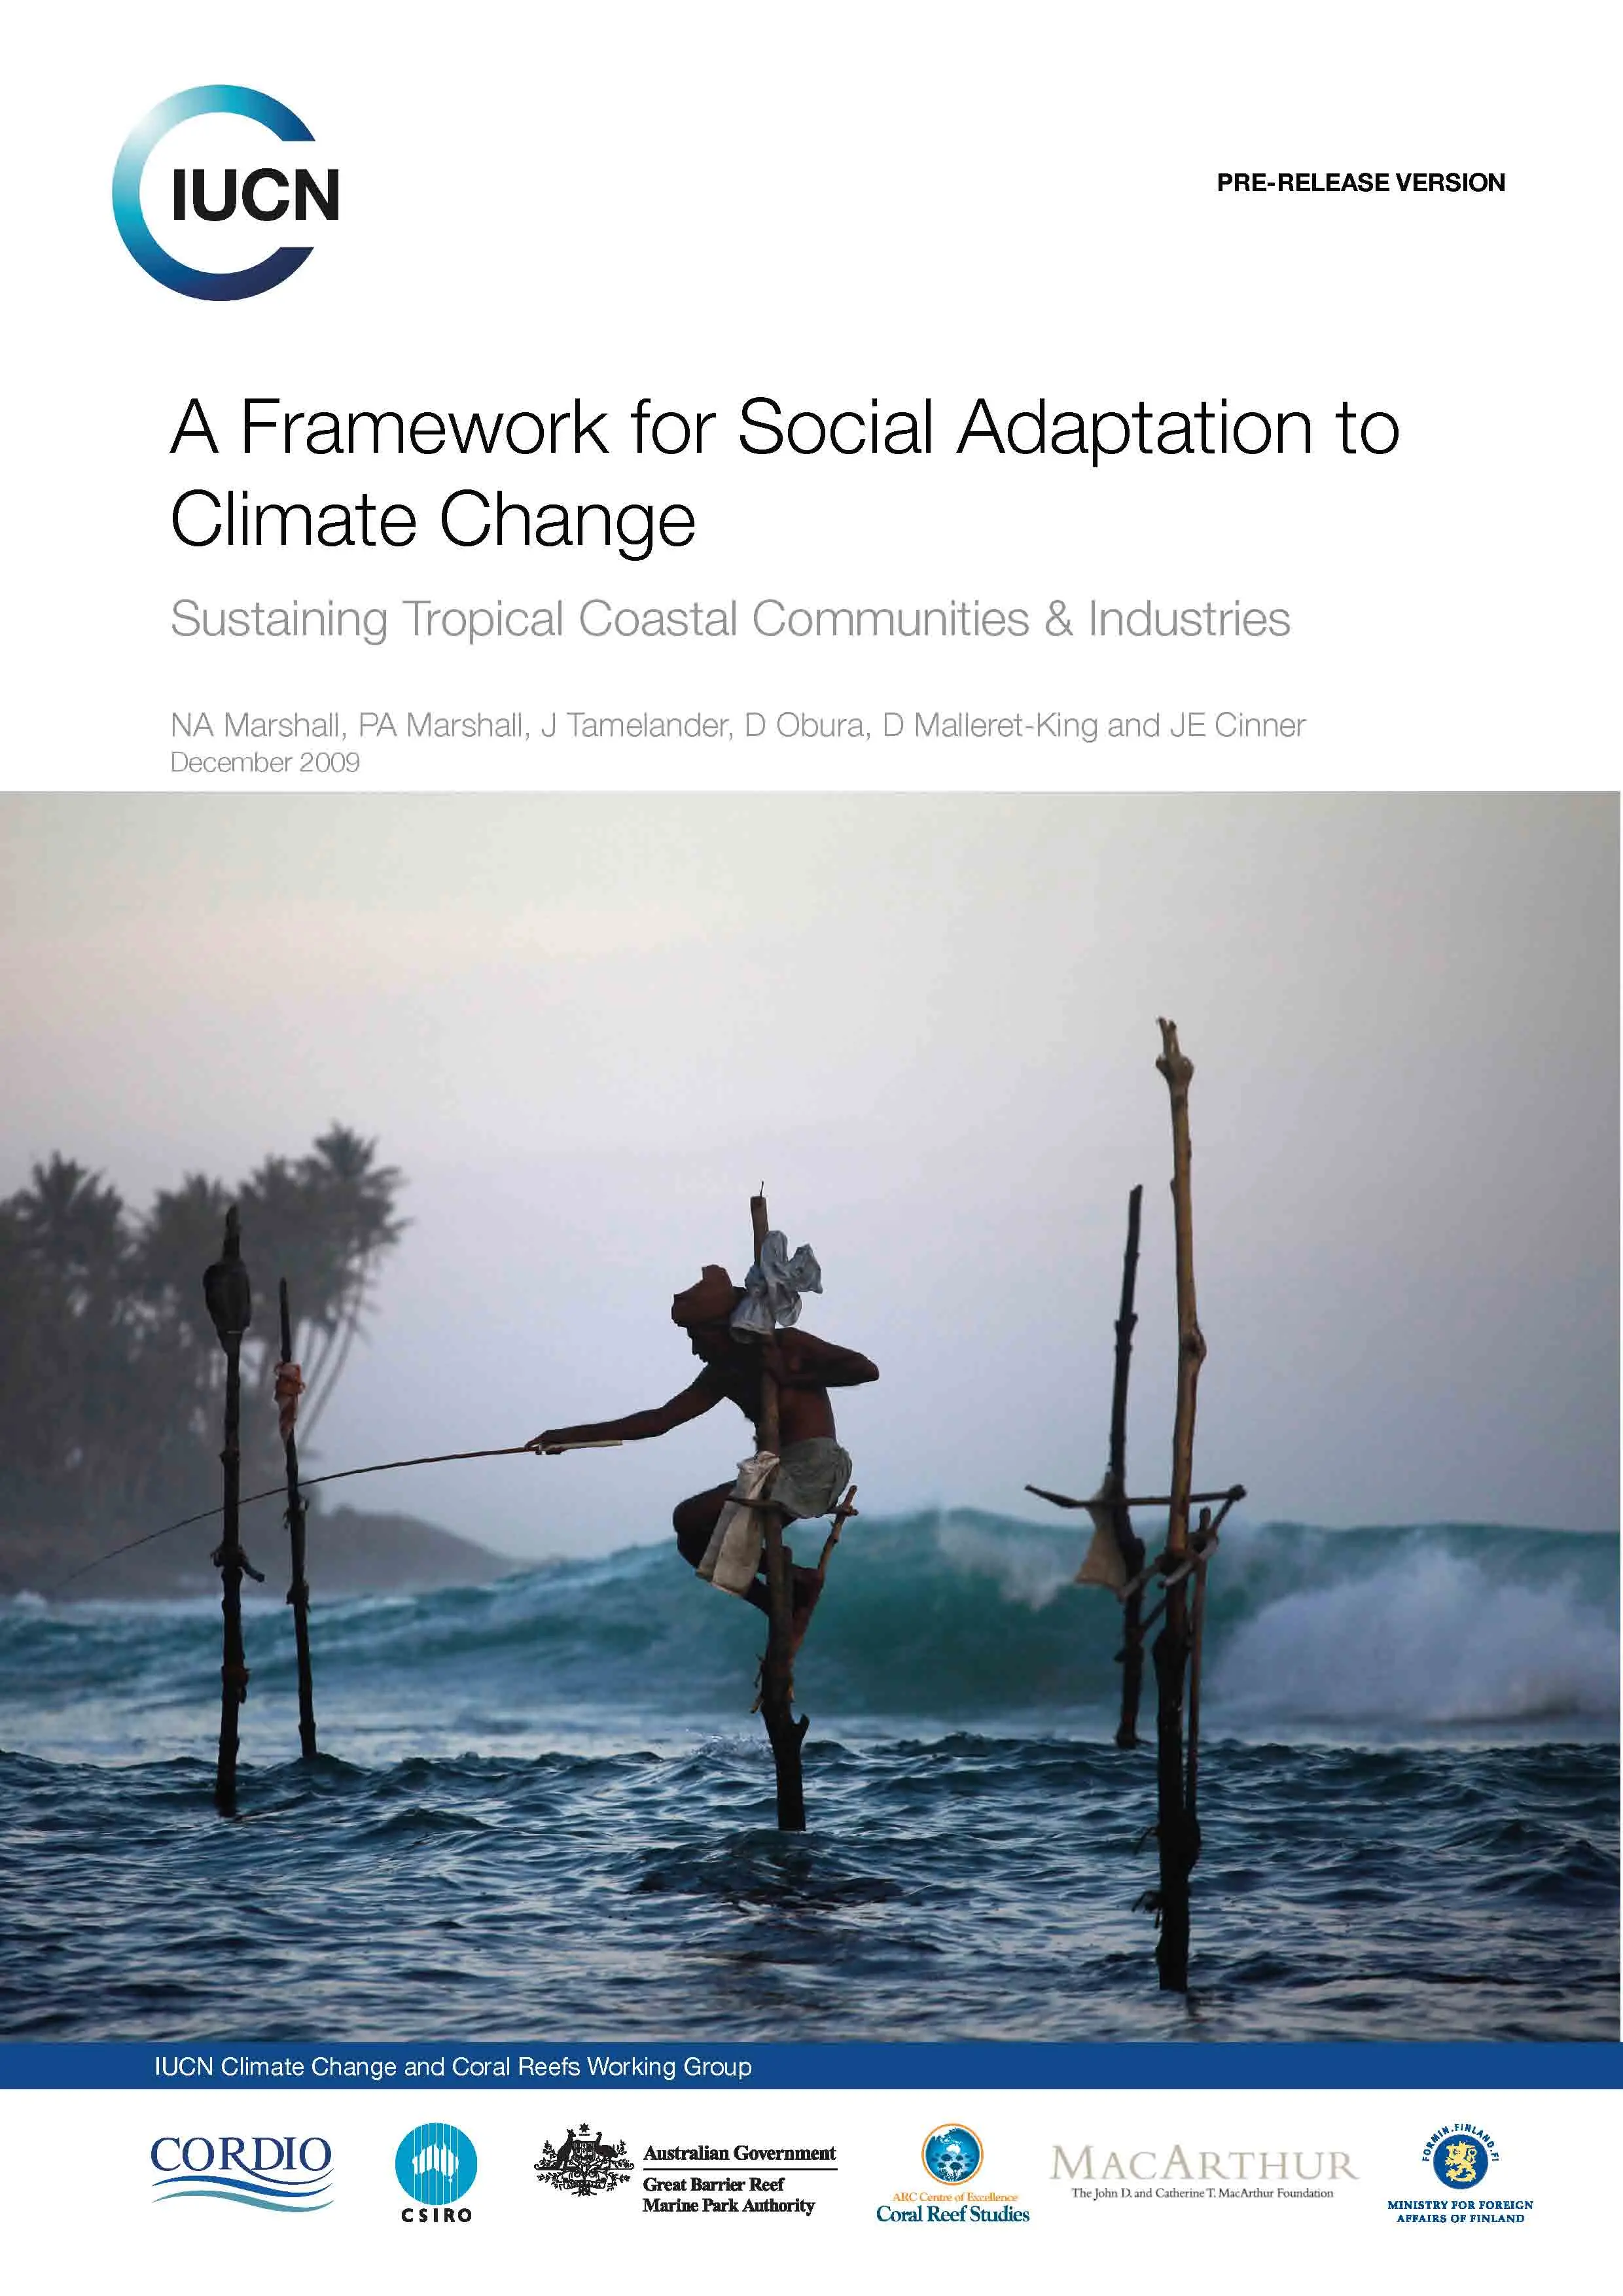 A Framework for Social Adaptation to Climate Change - Sustaining Tropical Coastal Communities & Industries